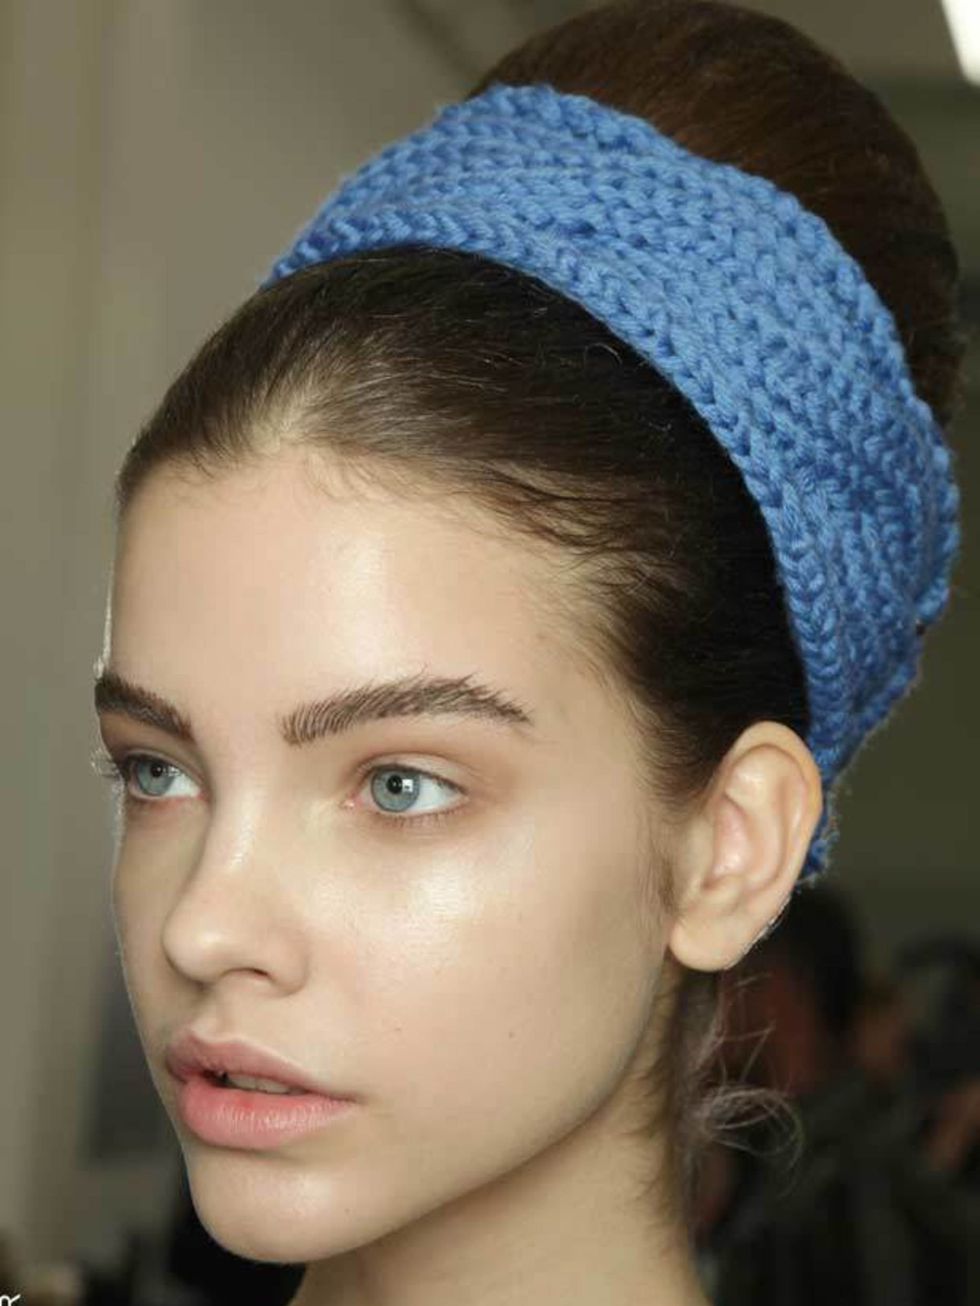 <p>Hair accessories are nothing new, but team ELLE has fallen in love with a particular accessory this season: the headband. Spotted at both <a href="http://www.elleuk.com/catwalk/collections/karl-lagerfeld/">Karl Lagerfeld </a>and <a href="http://www.ell